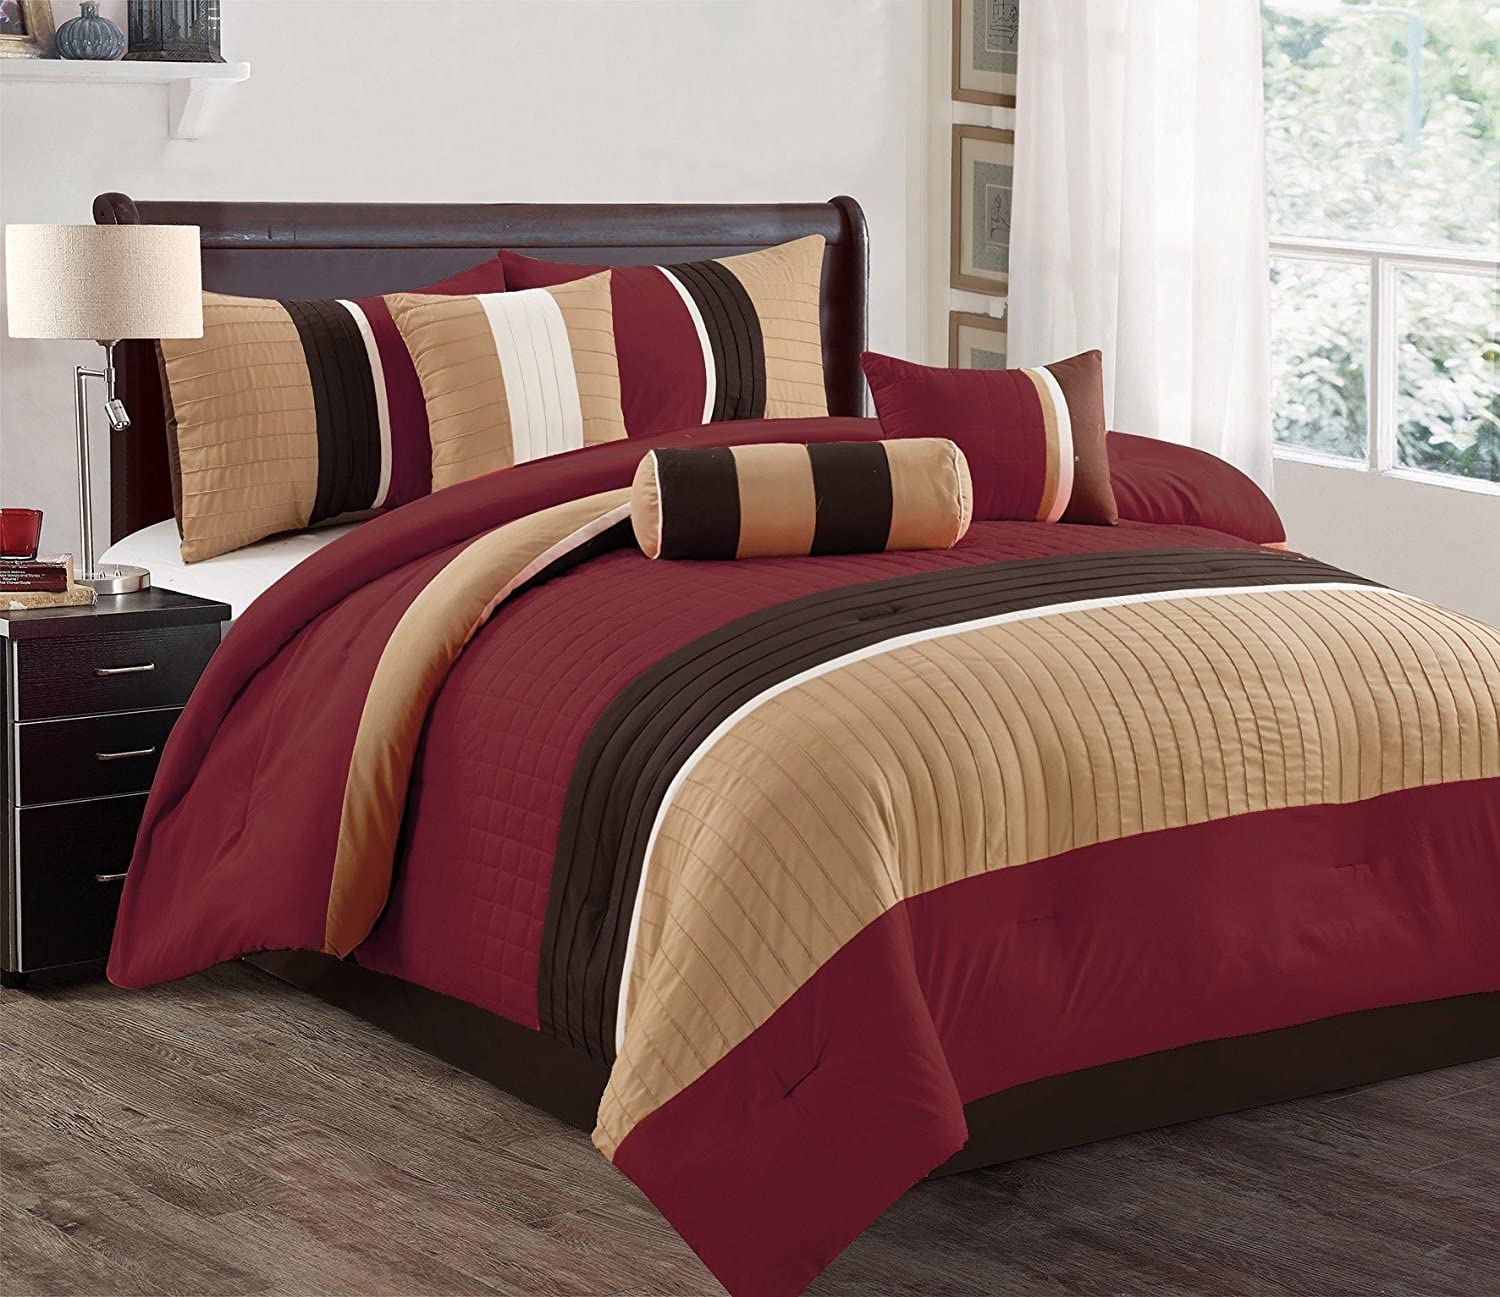 Closeout 7 Piece Luxury Bed in Bag Comforter Set (Queen, Red/Taupe) | eBay